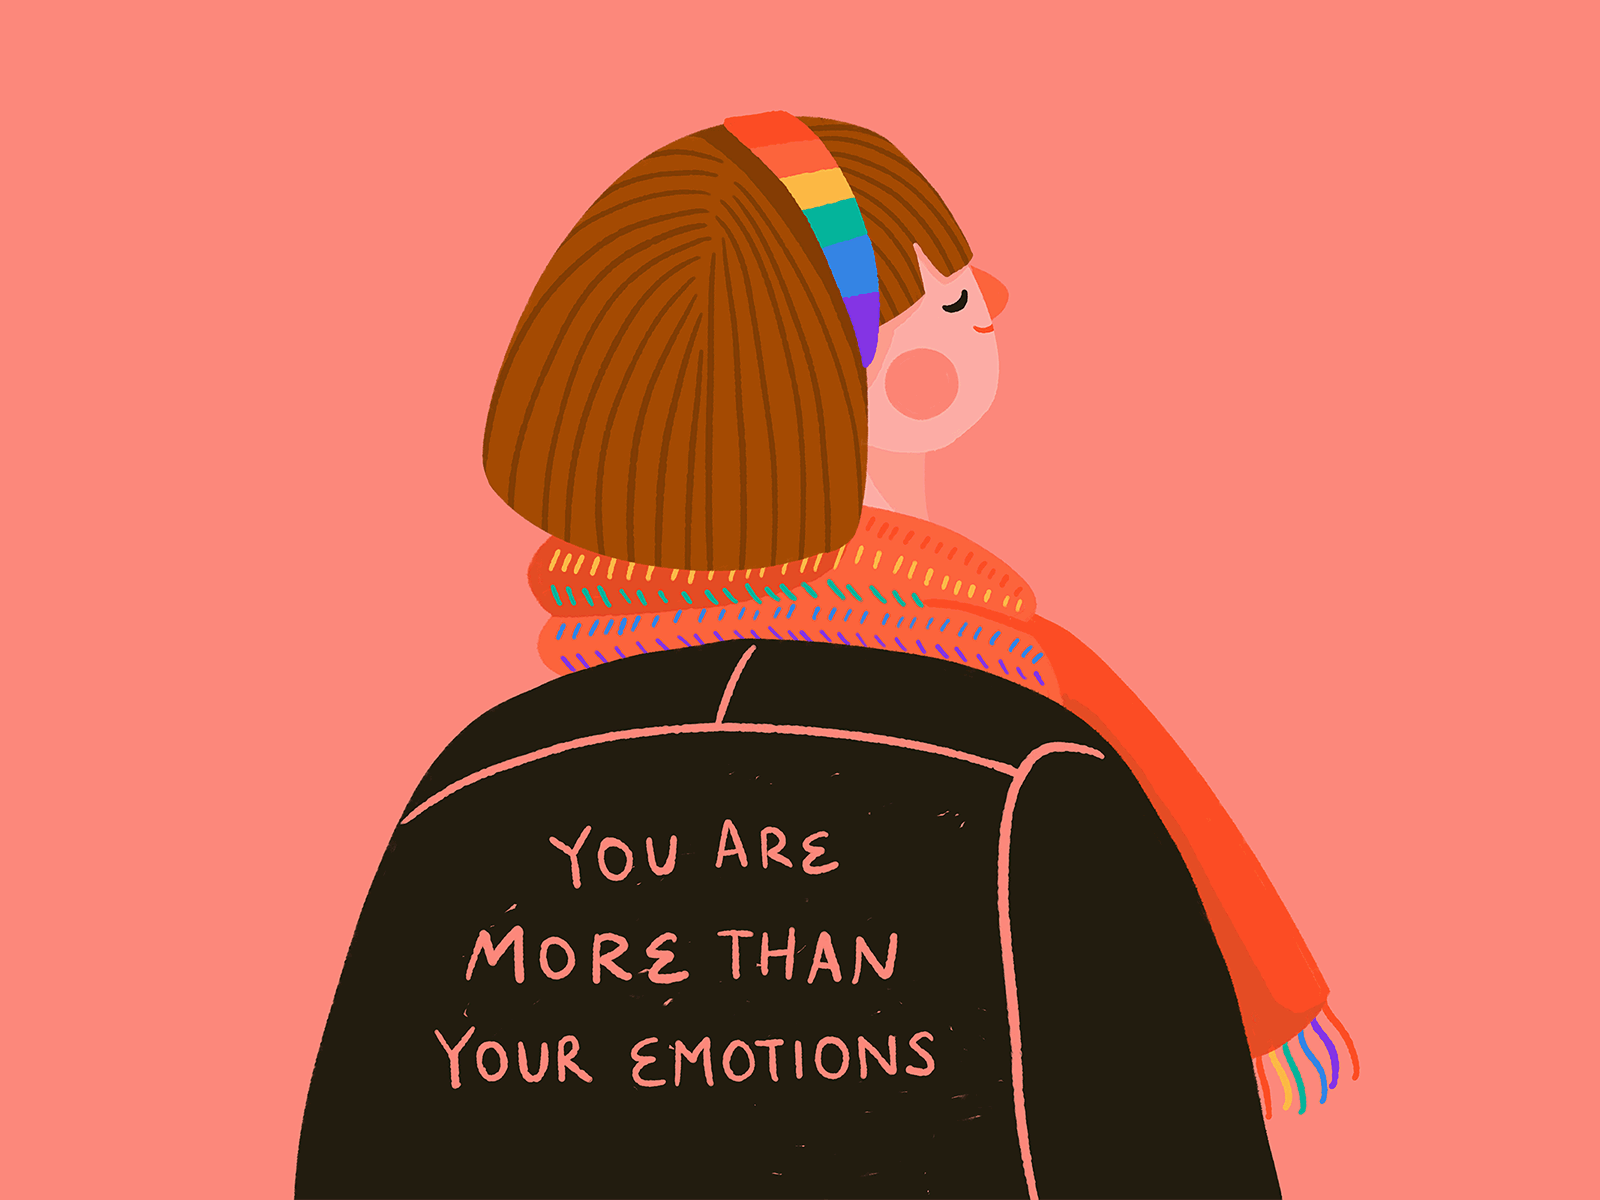 You are more than your emotions character emotion feelings flat girl illustration rainbow scarf woman women women empowerment